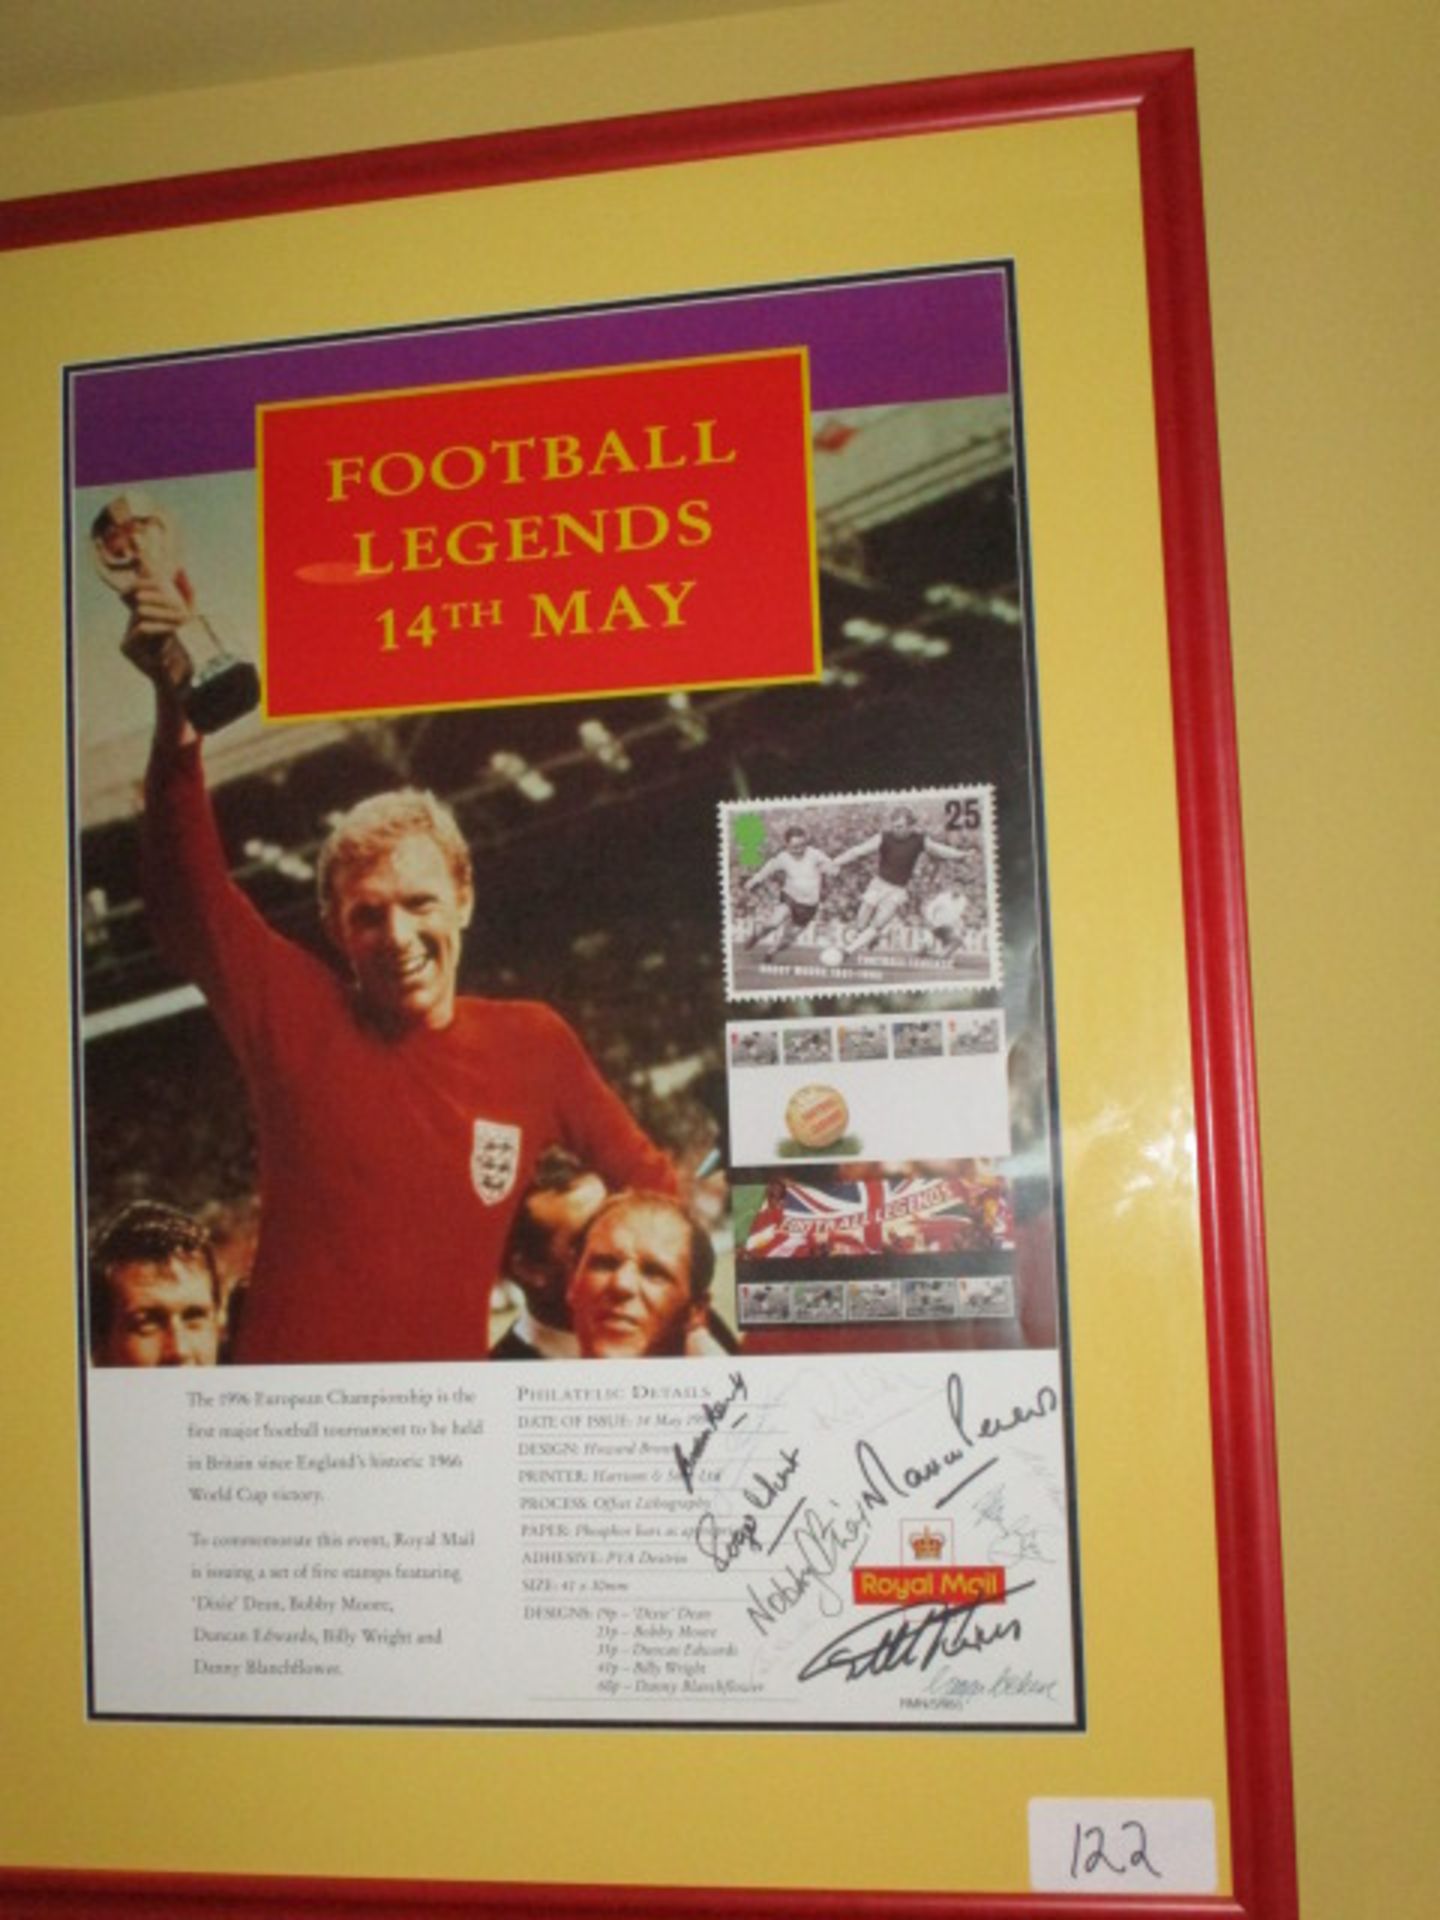 A Royal Mail promotional poster for the 1996 issue of the """"Football Legends"""" stamps featuring